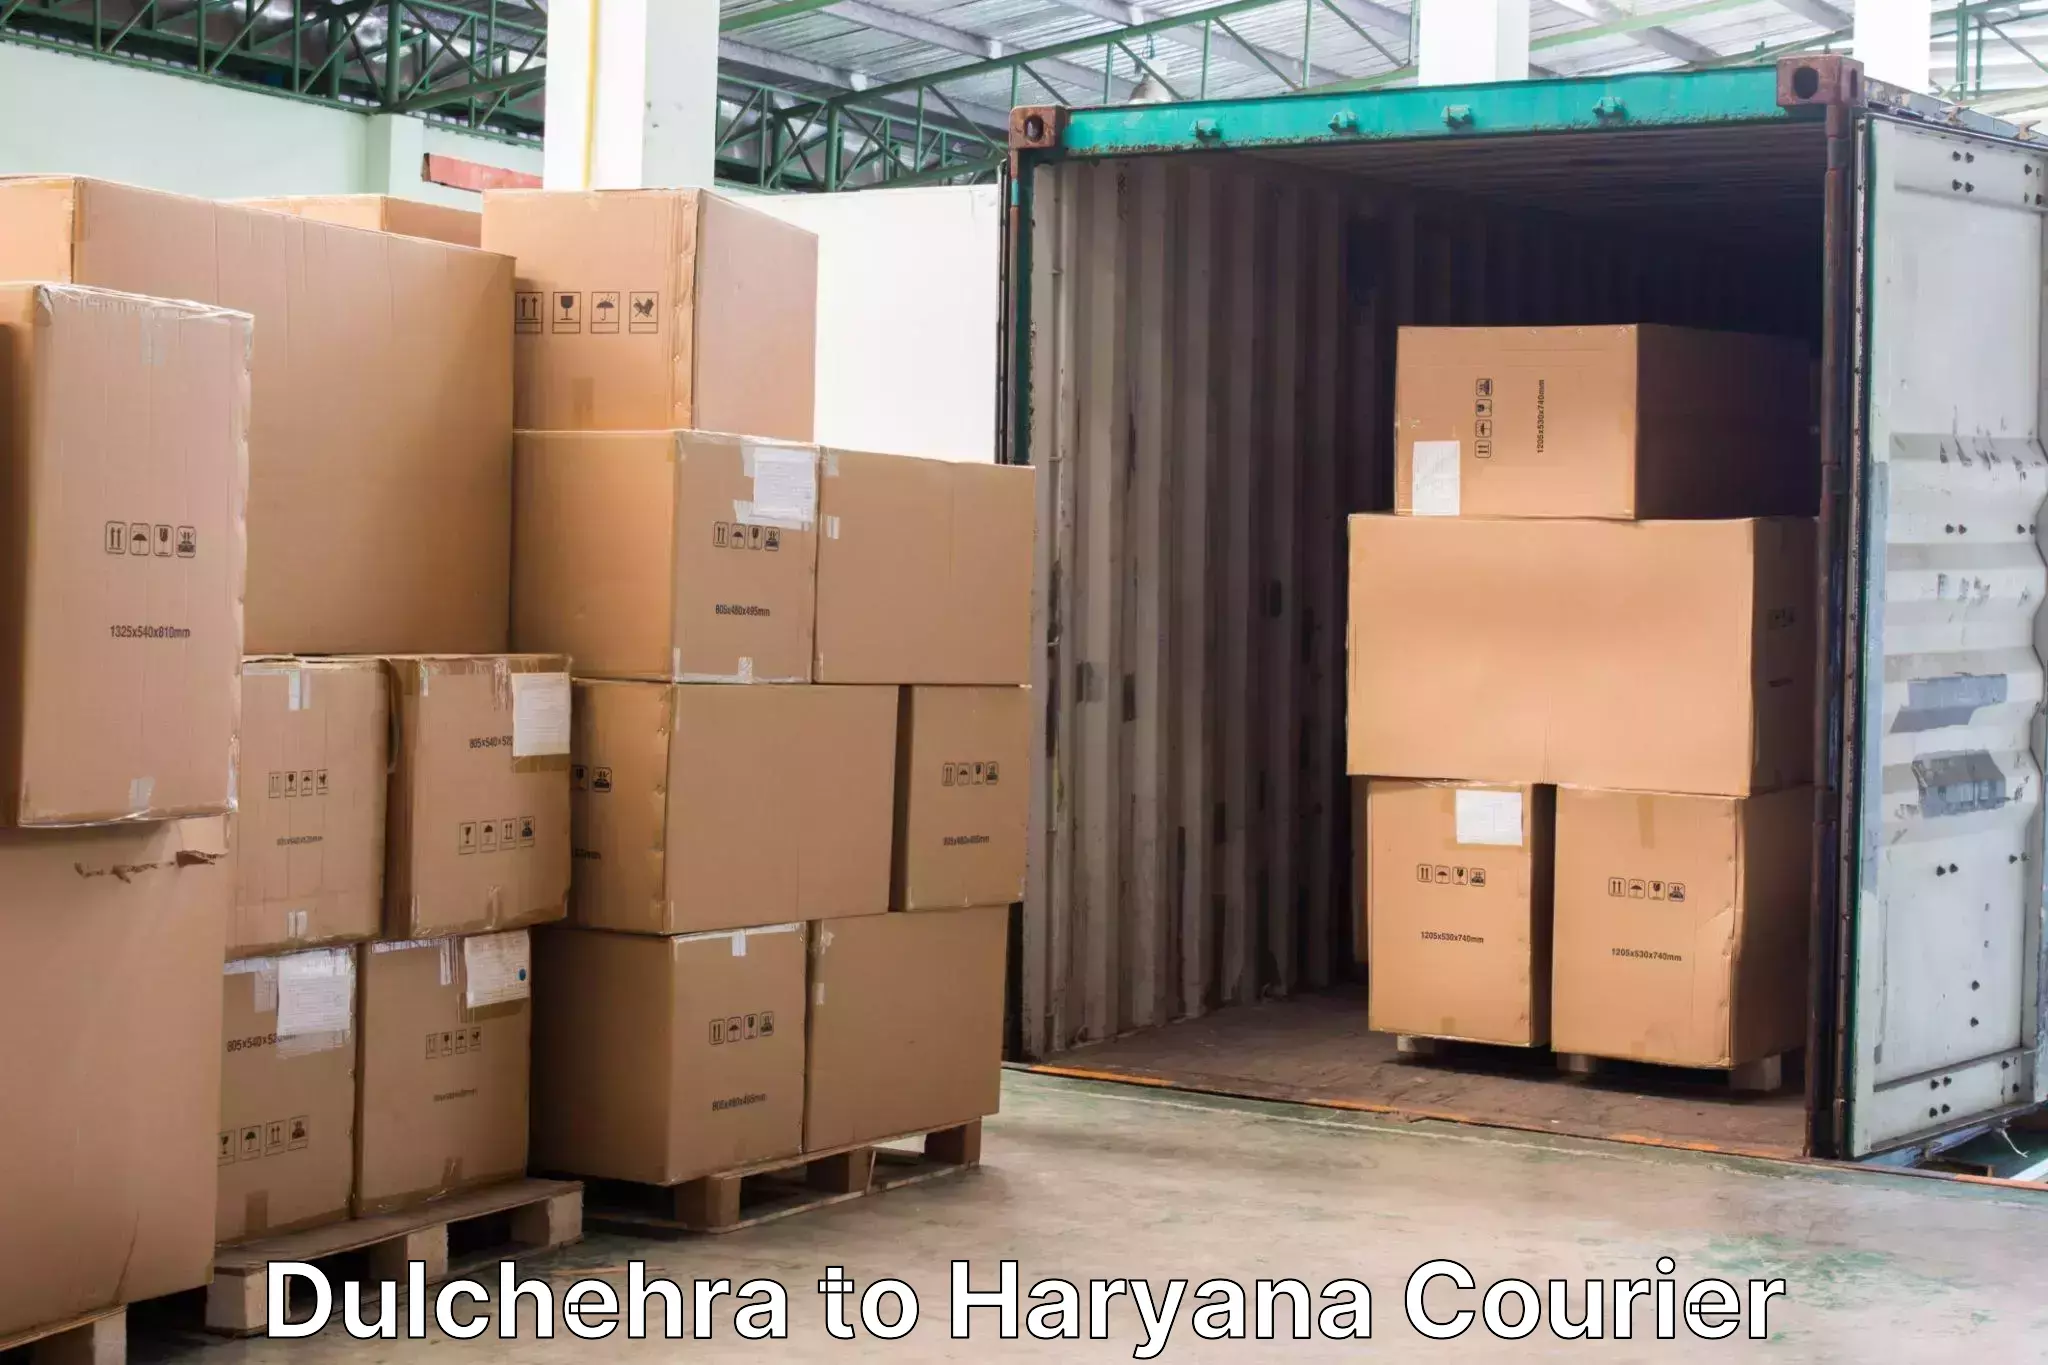 Luggage shipment specialists in Dulchehra to NCR Haryana